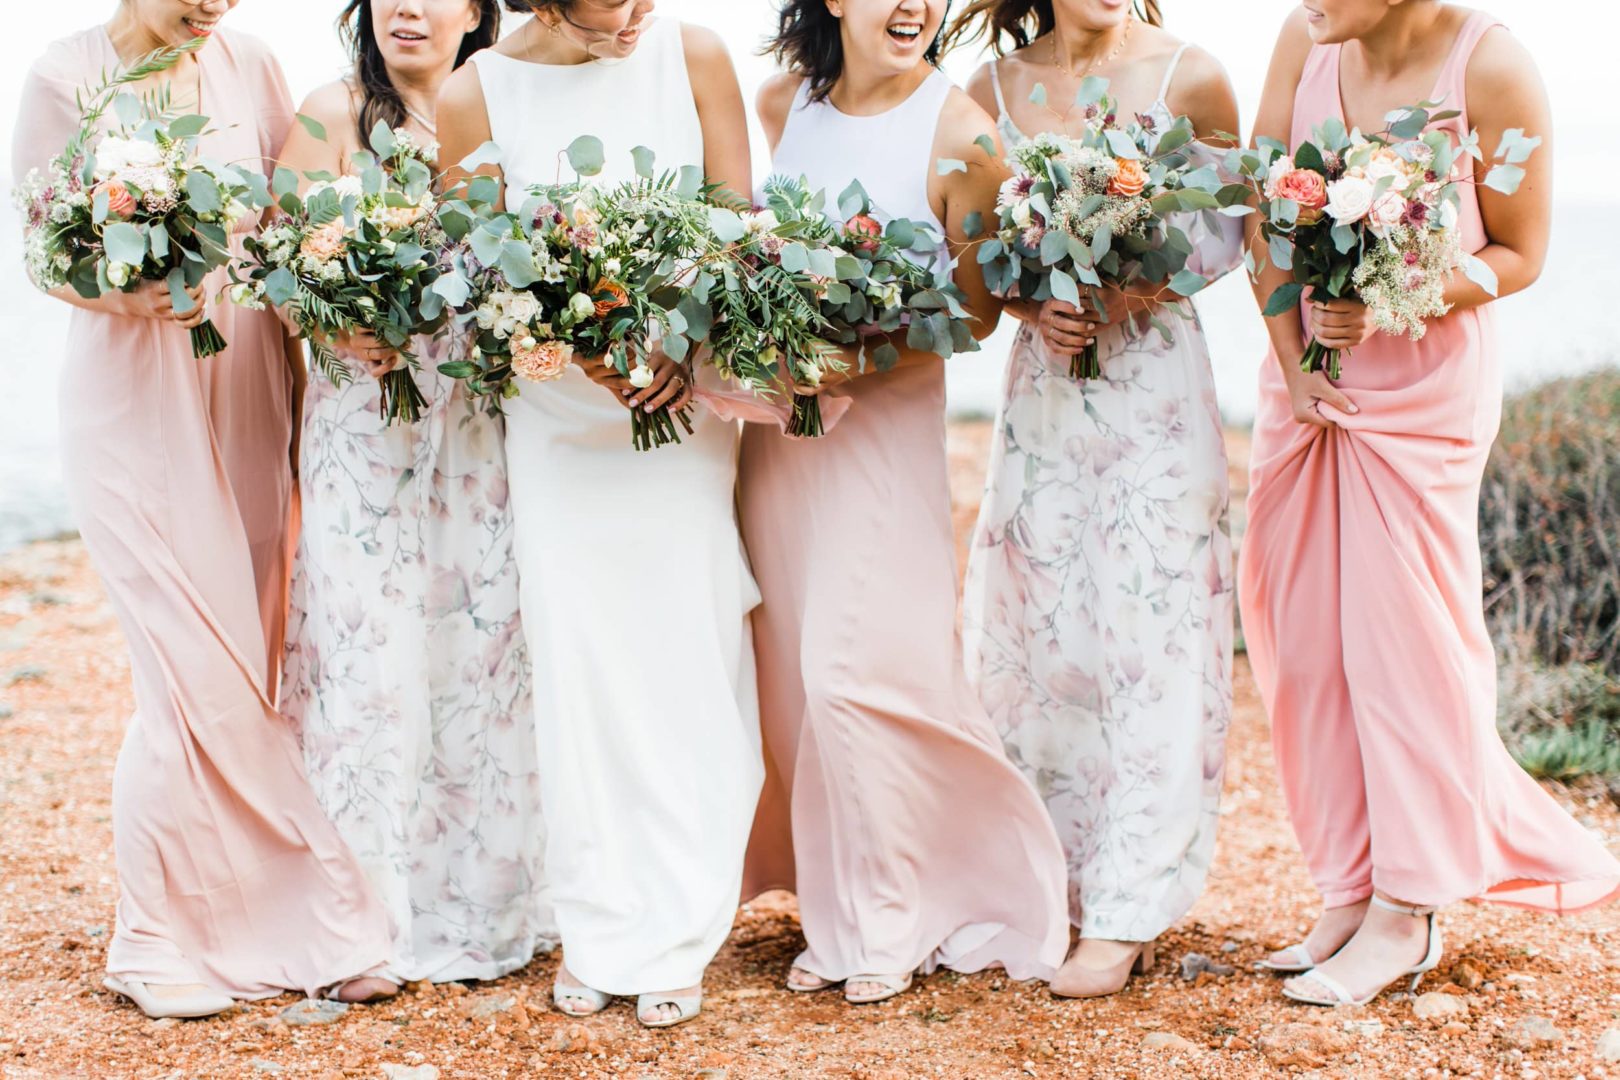 Bridesmaids bouquets for autumn wedding in Athens Greece